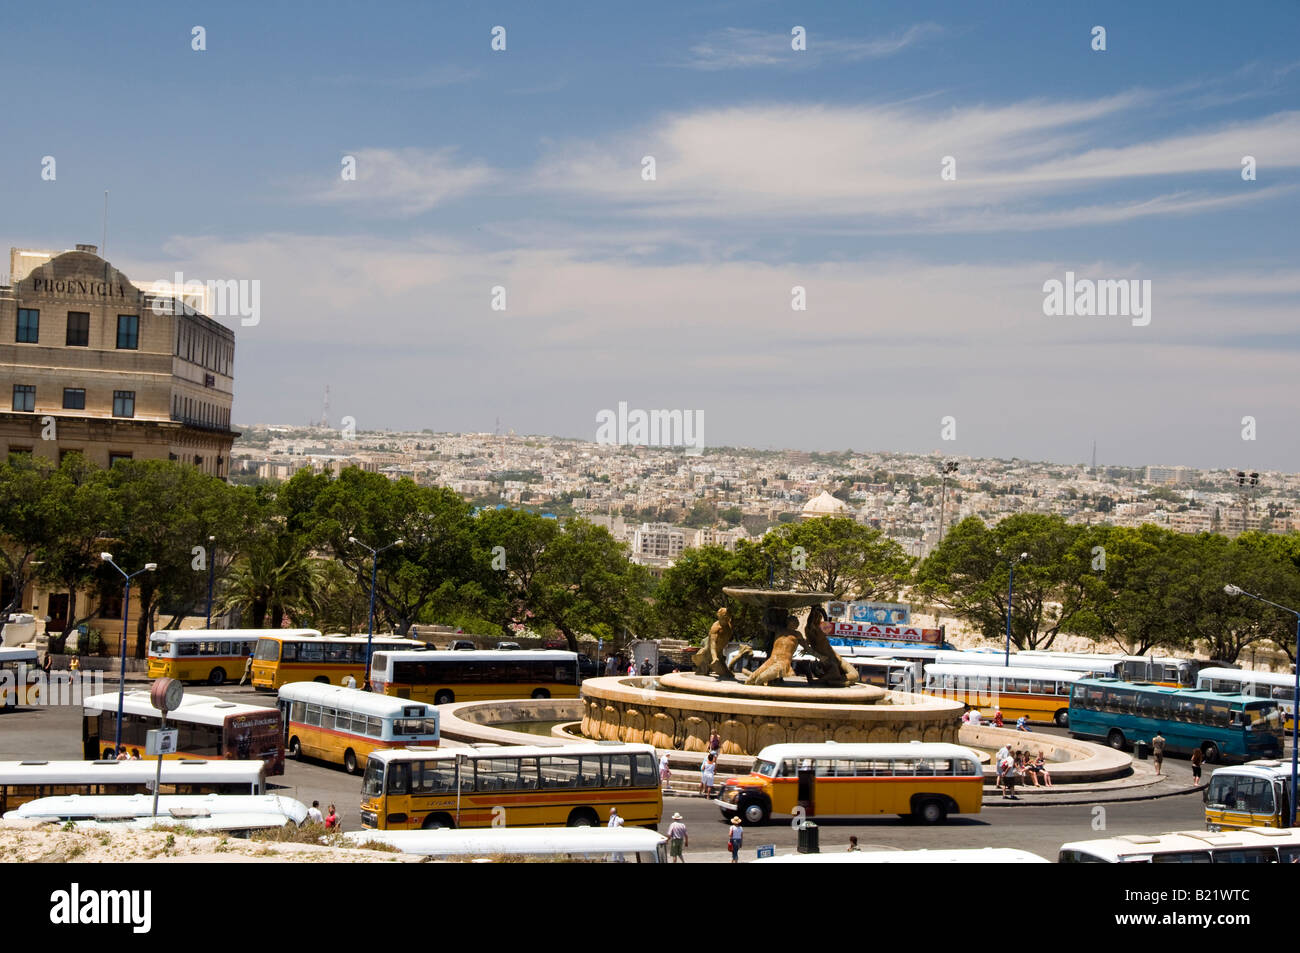 The bus terminal in Valletta is a roundabout at the Triton Fountain.  The classic buses in orange and yellow surround fountain. Stock Photo